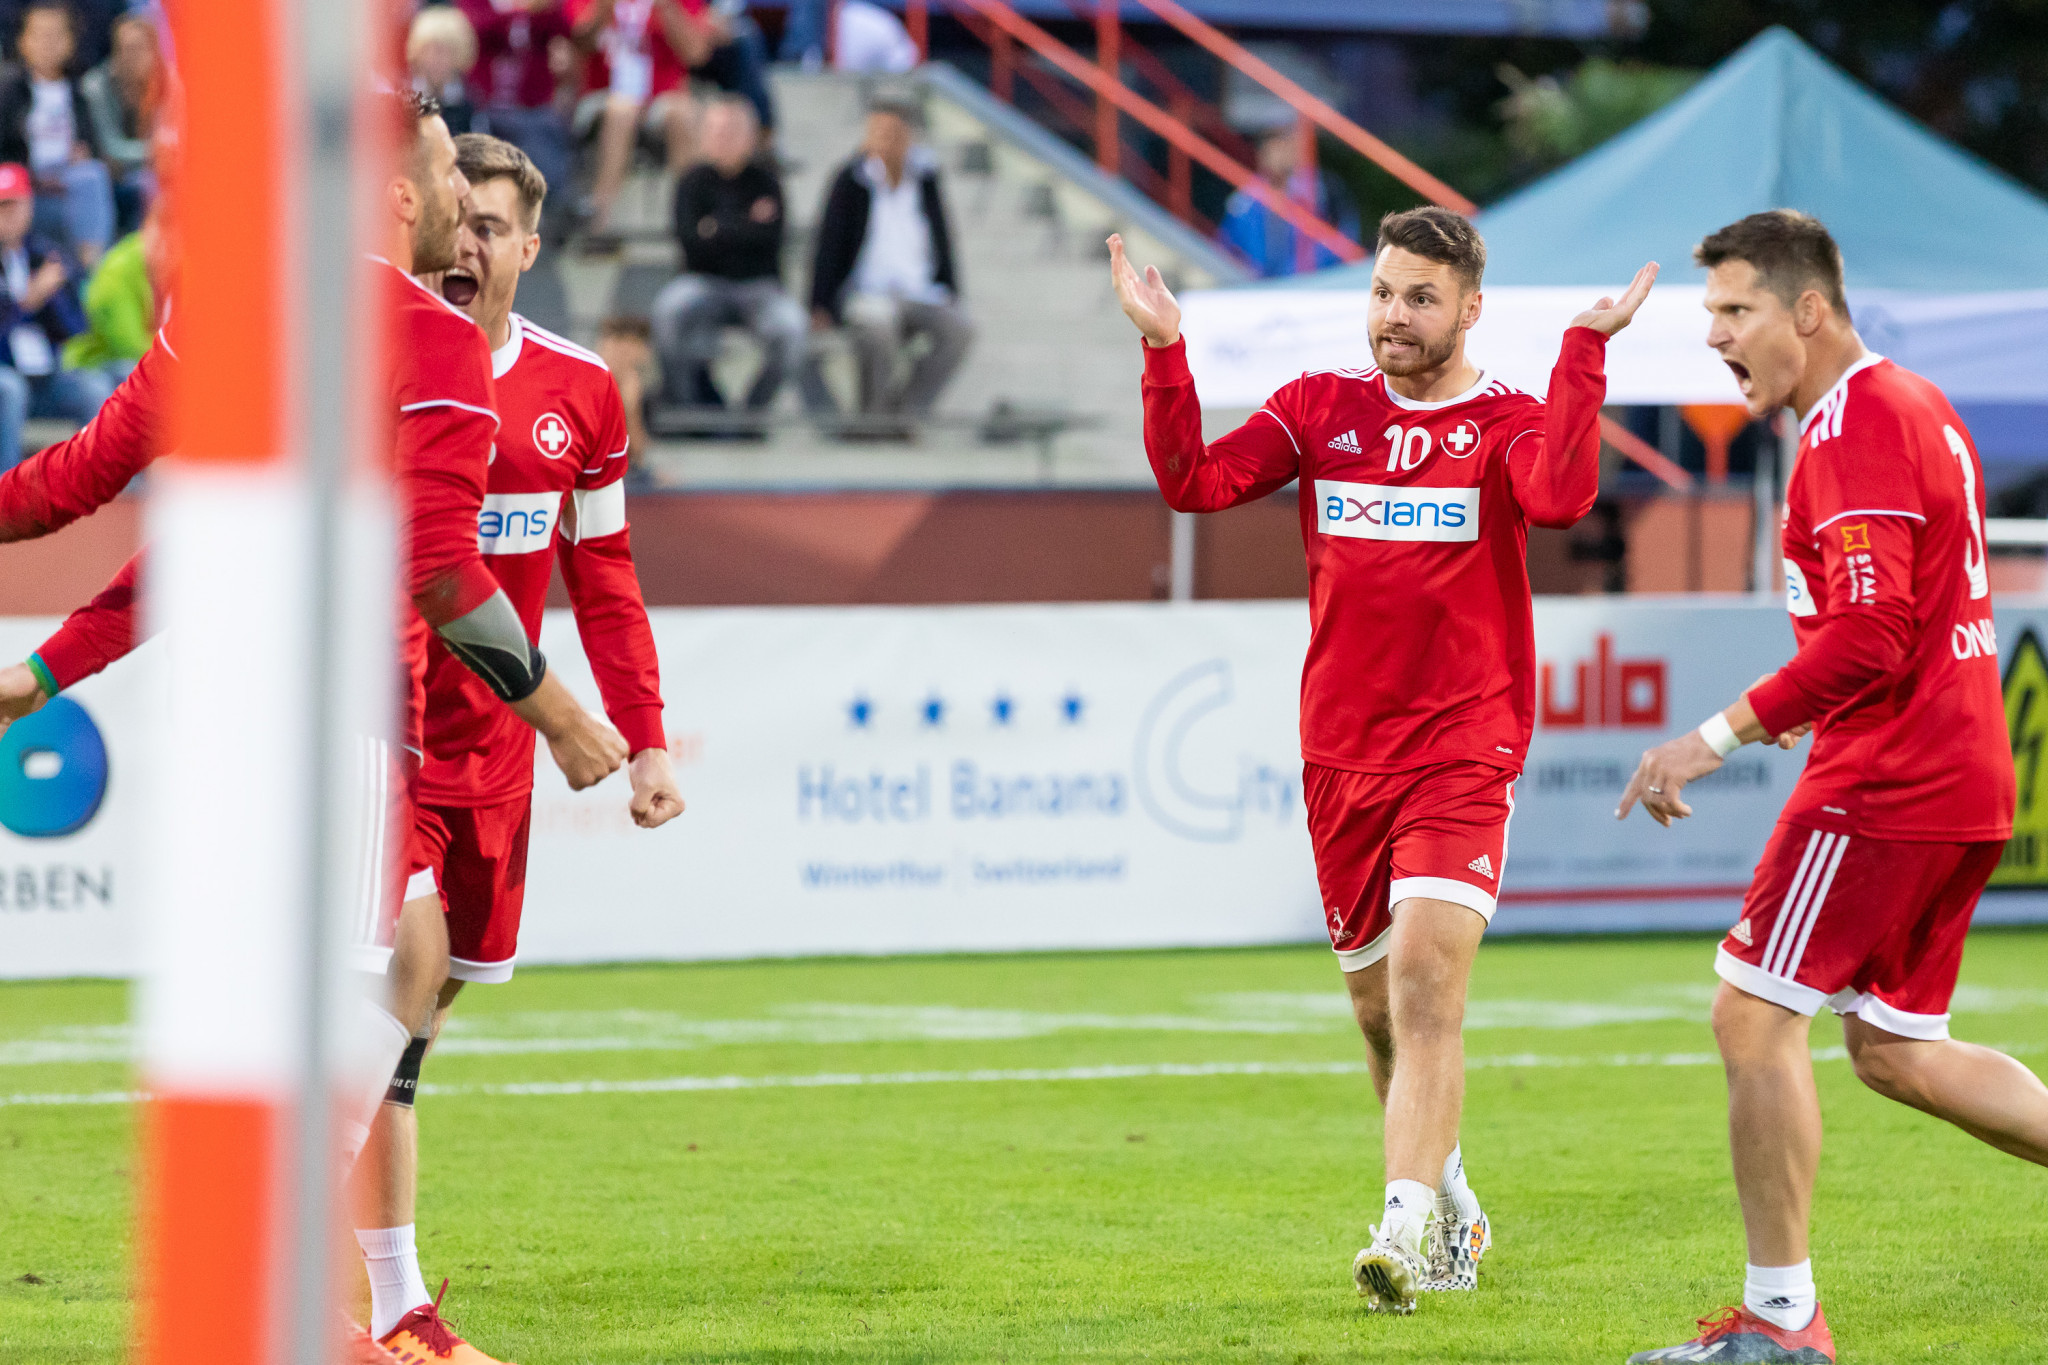 Hosts Switzerland were among the four teams that booked their place in the quarter-finals as action continued today at the International Fistball Association World Championship in Winterthur ©IFA 2019 Fistball World Championship